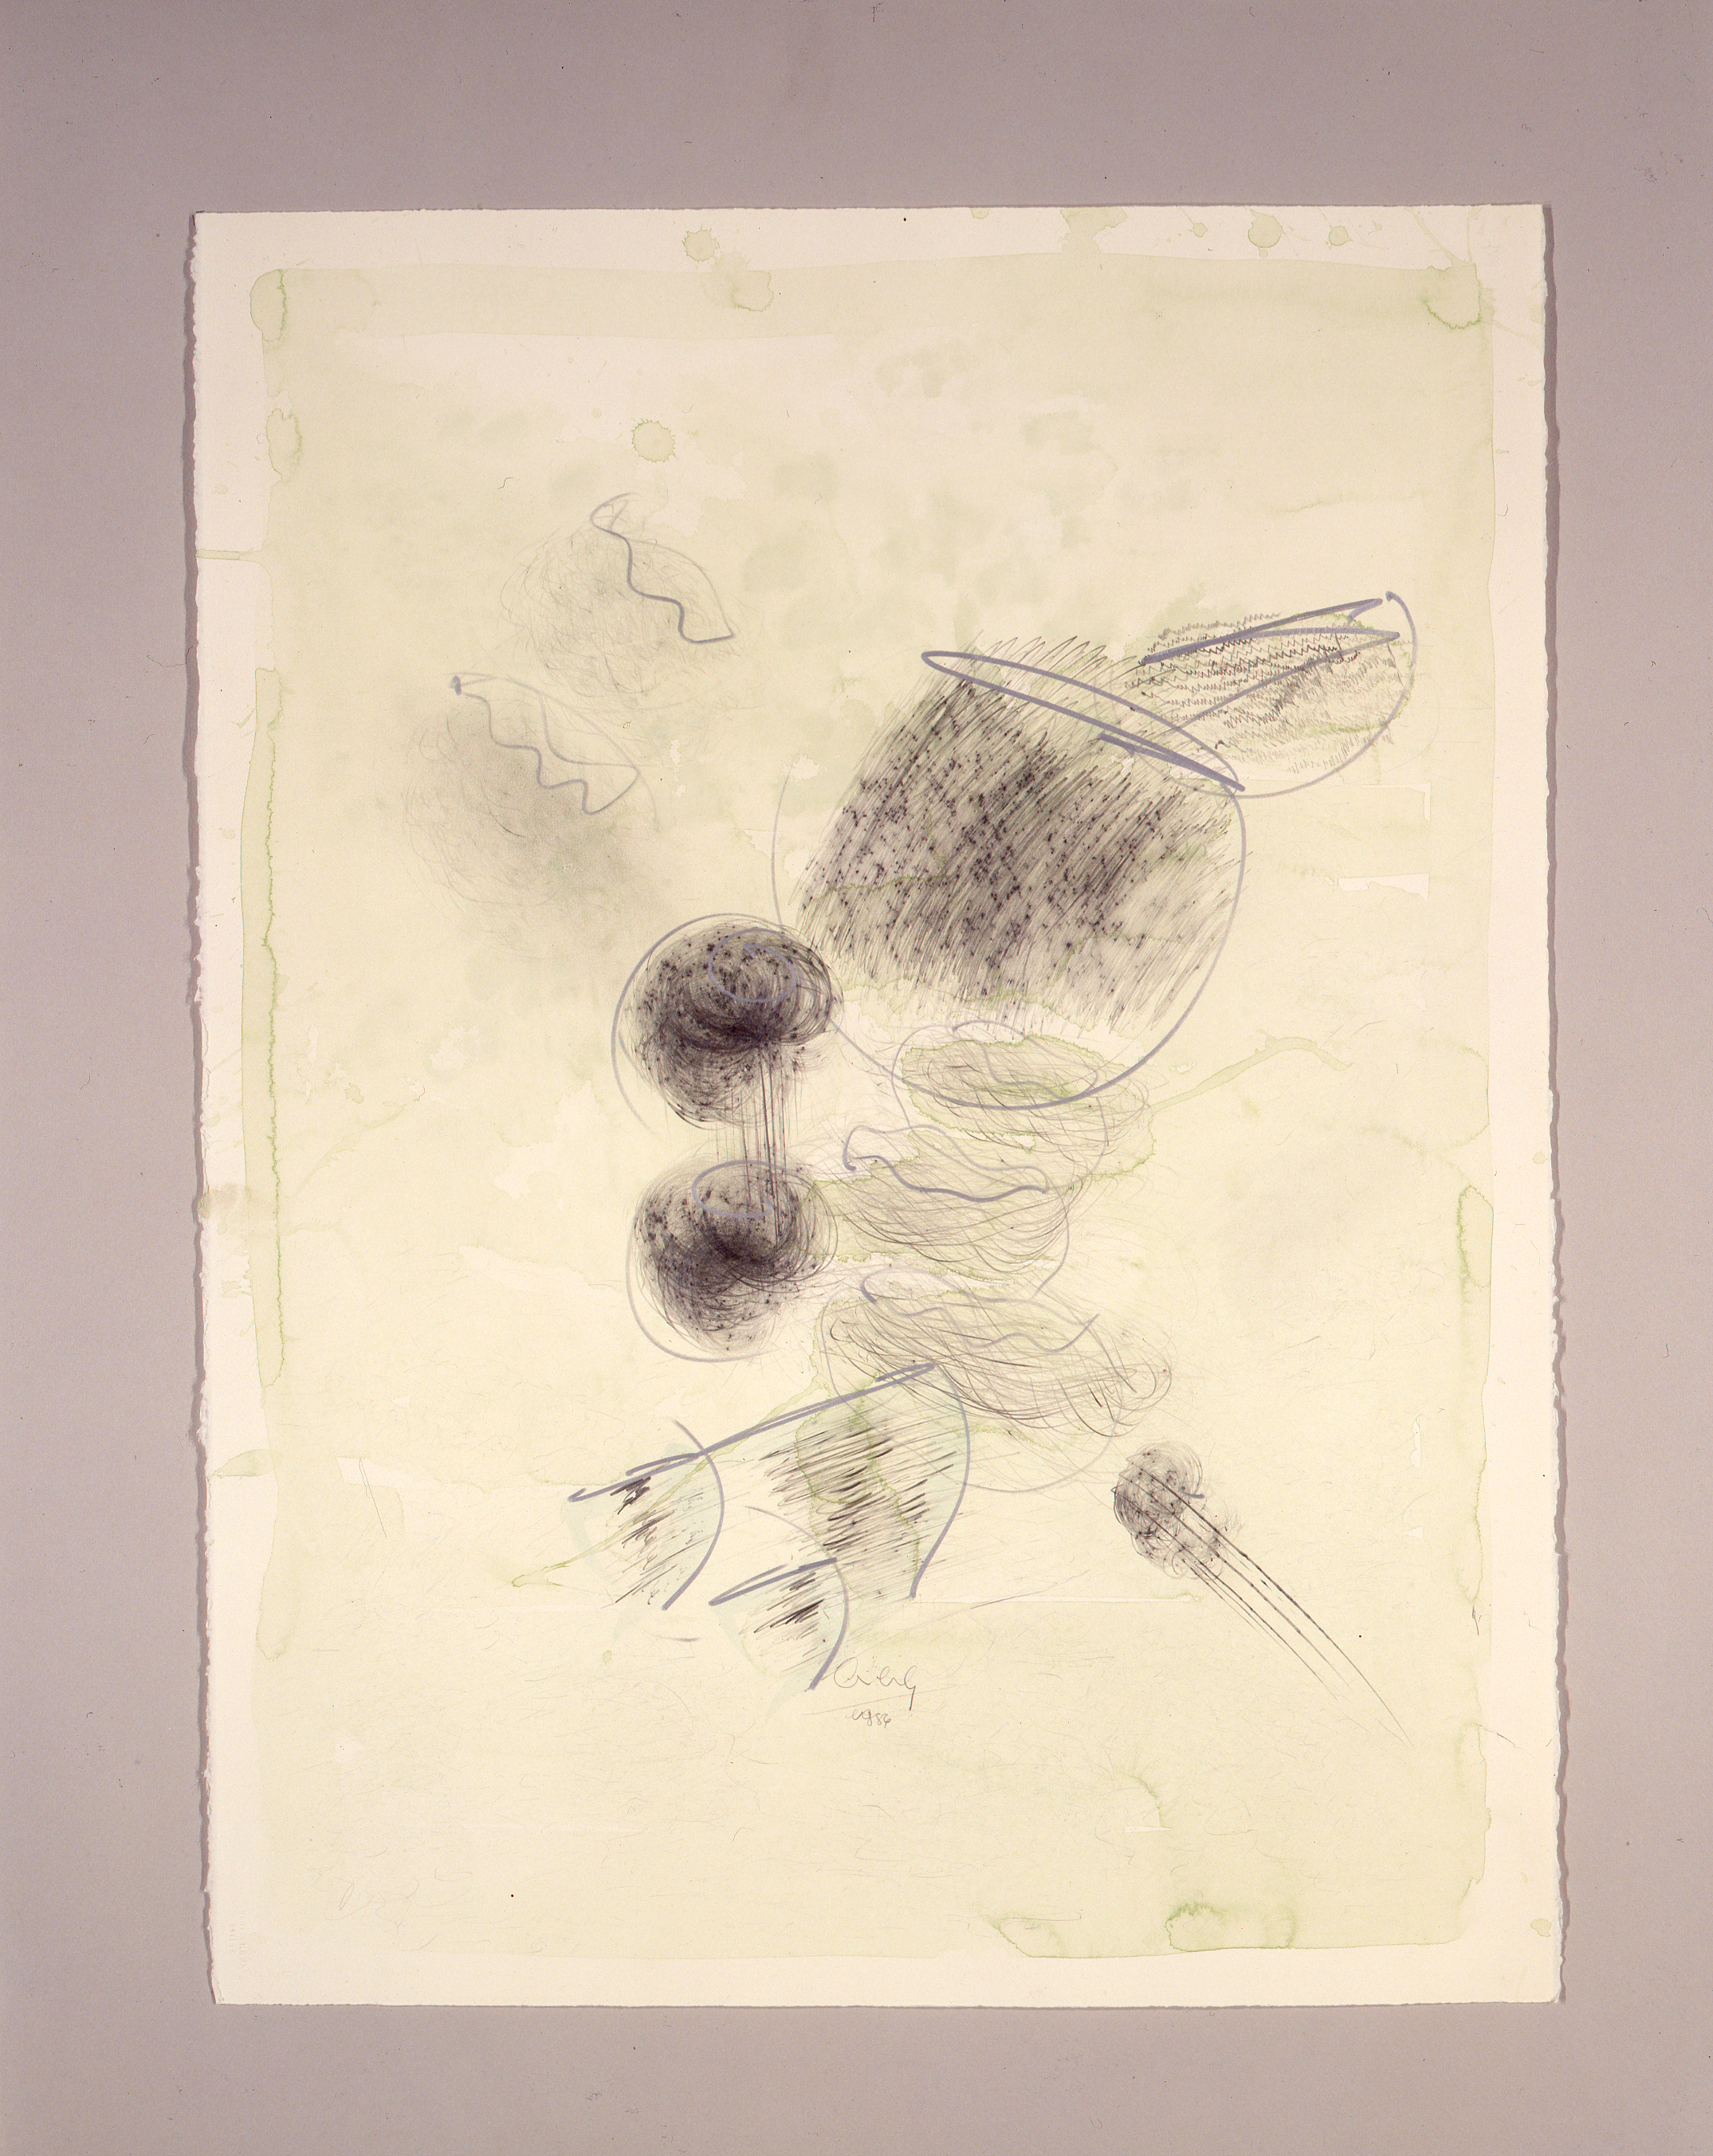  Dale Chihuly,&nbsp; Macchia Drawing #27,&nbsp; (1982, graphite and watercolor on paper, 30 x 22 inches), DC.85 